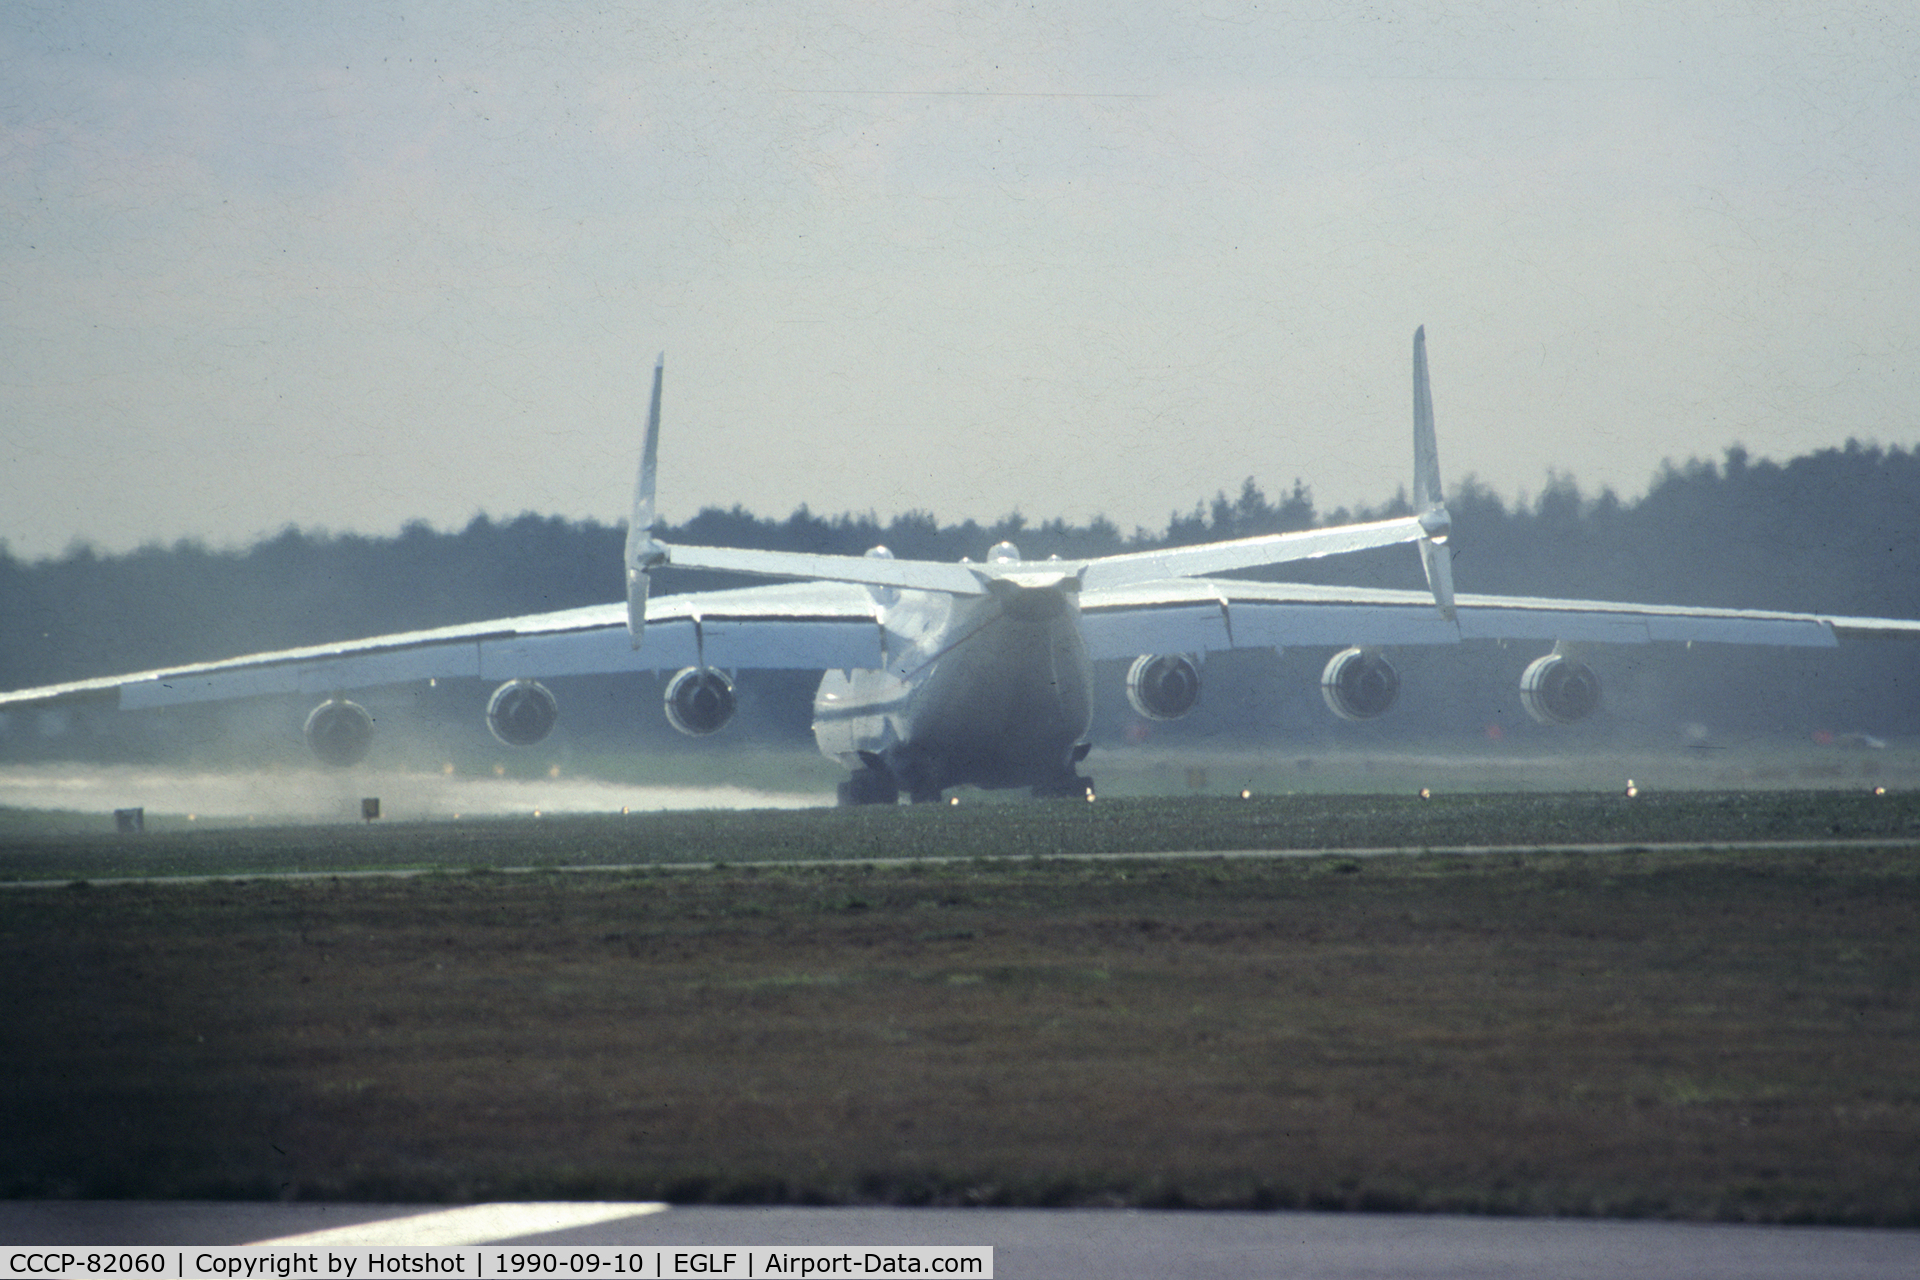 CCCP-82060, 1988 Antonov An-225 Mriya C/N 19530503763, Rollout after touchdown; a demonstration of wake turbulence due to the uplifted dirt from the grass strips